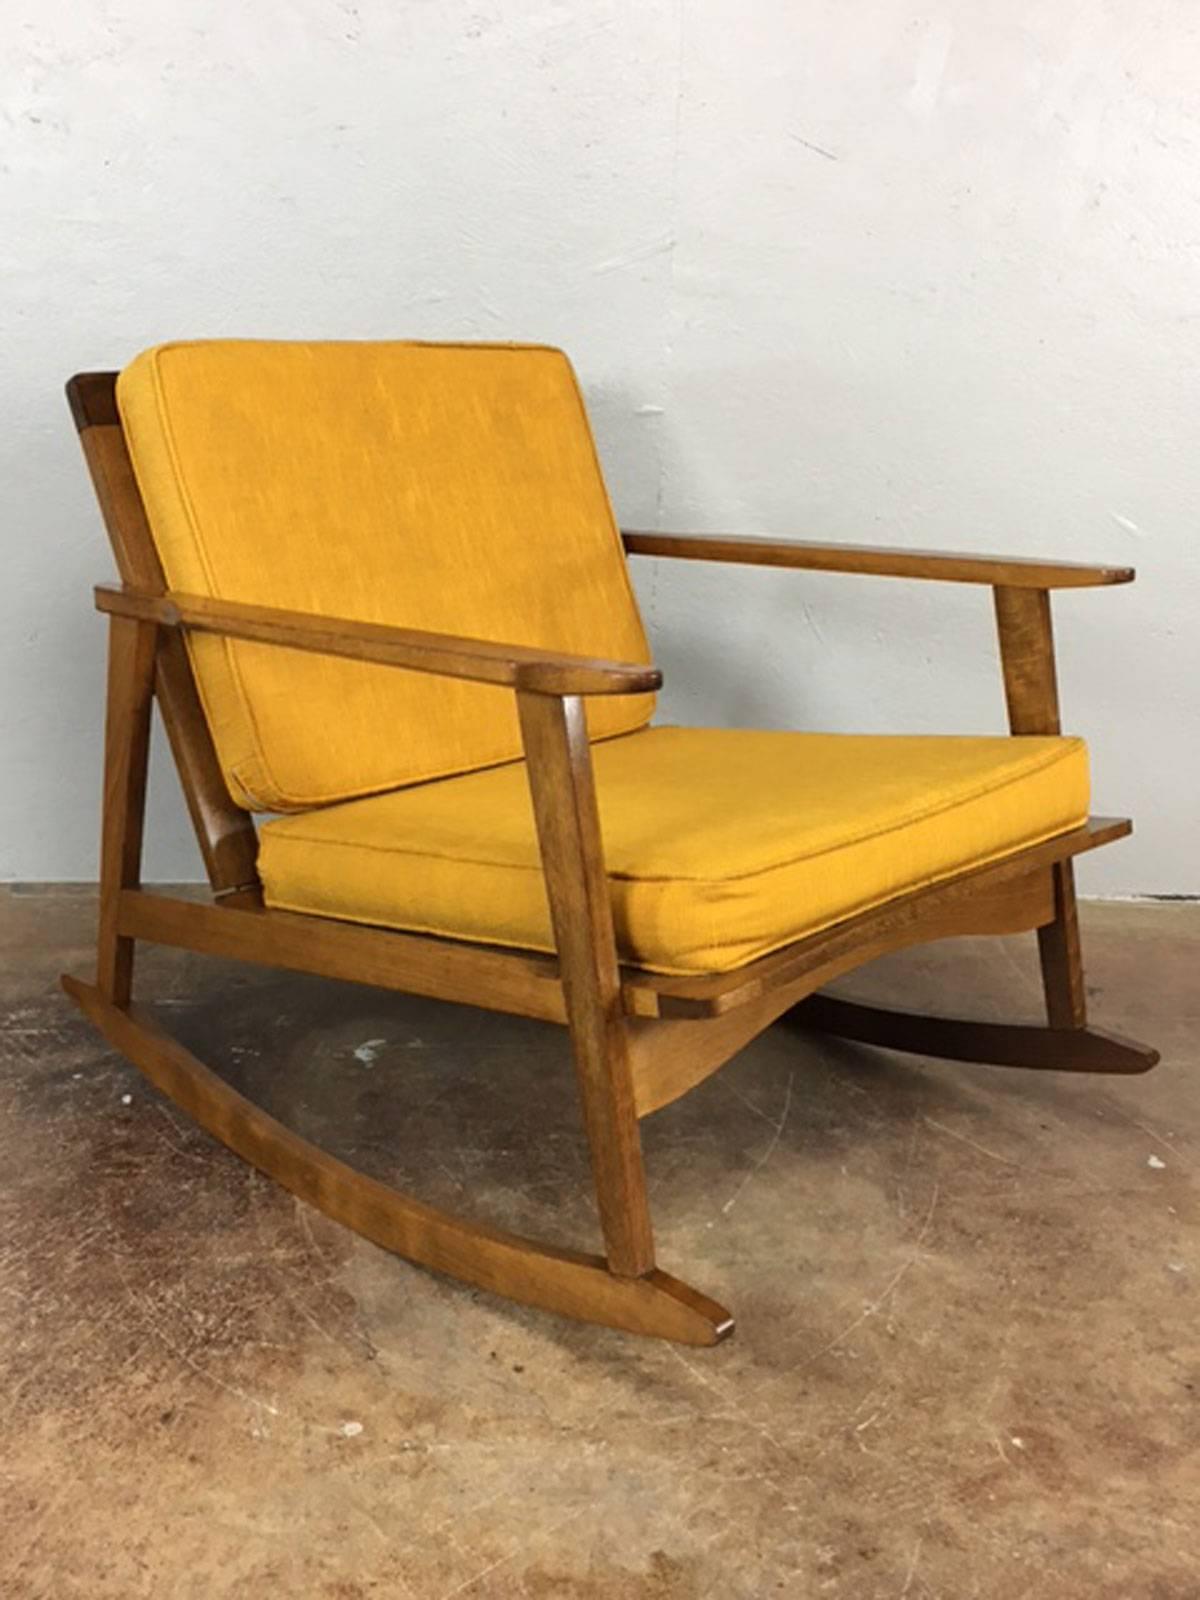 Danish style rocker lounge chair in walnut. Made in the former Yugoslavia republic. Solid. Original upholstery is useable. Easily changed if desired.